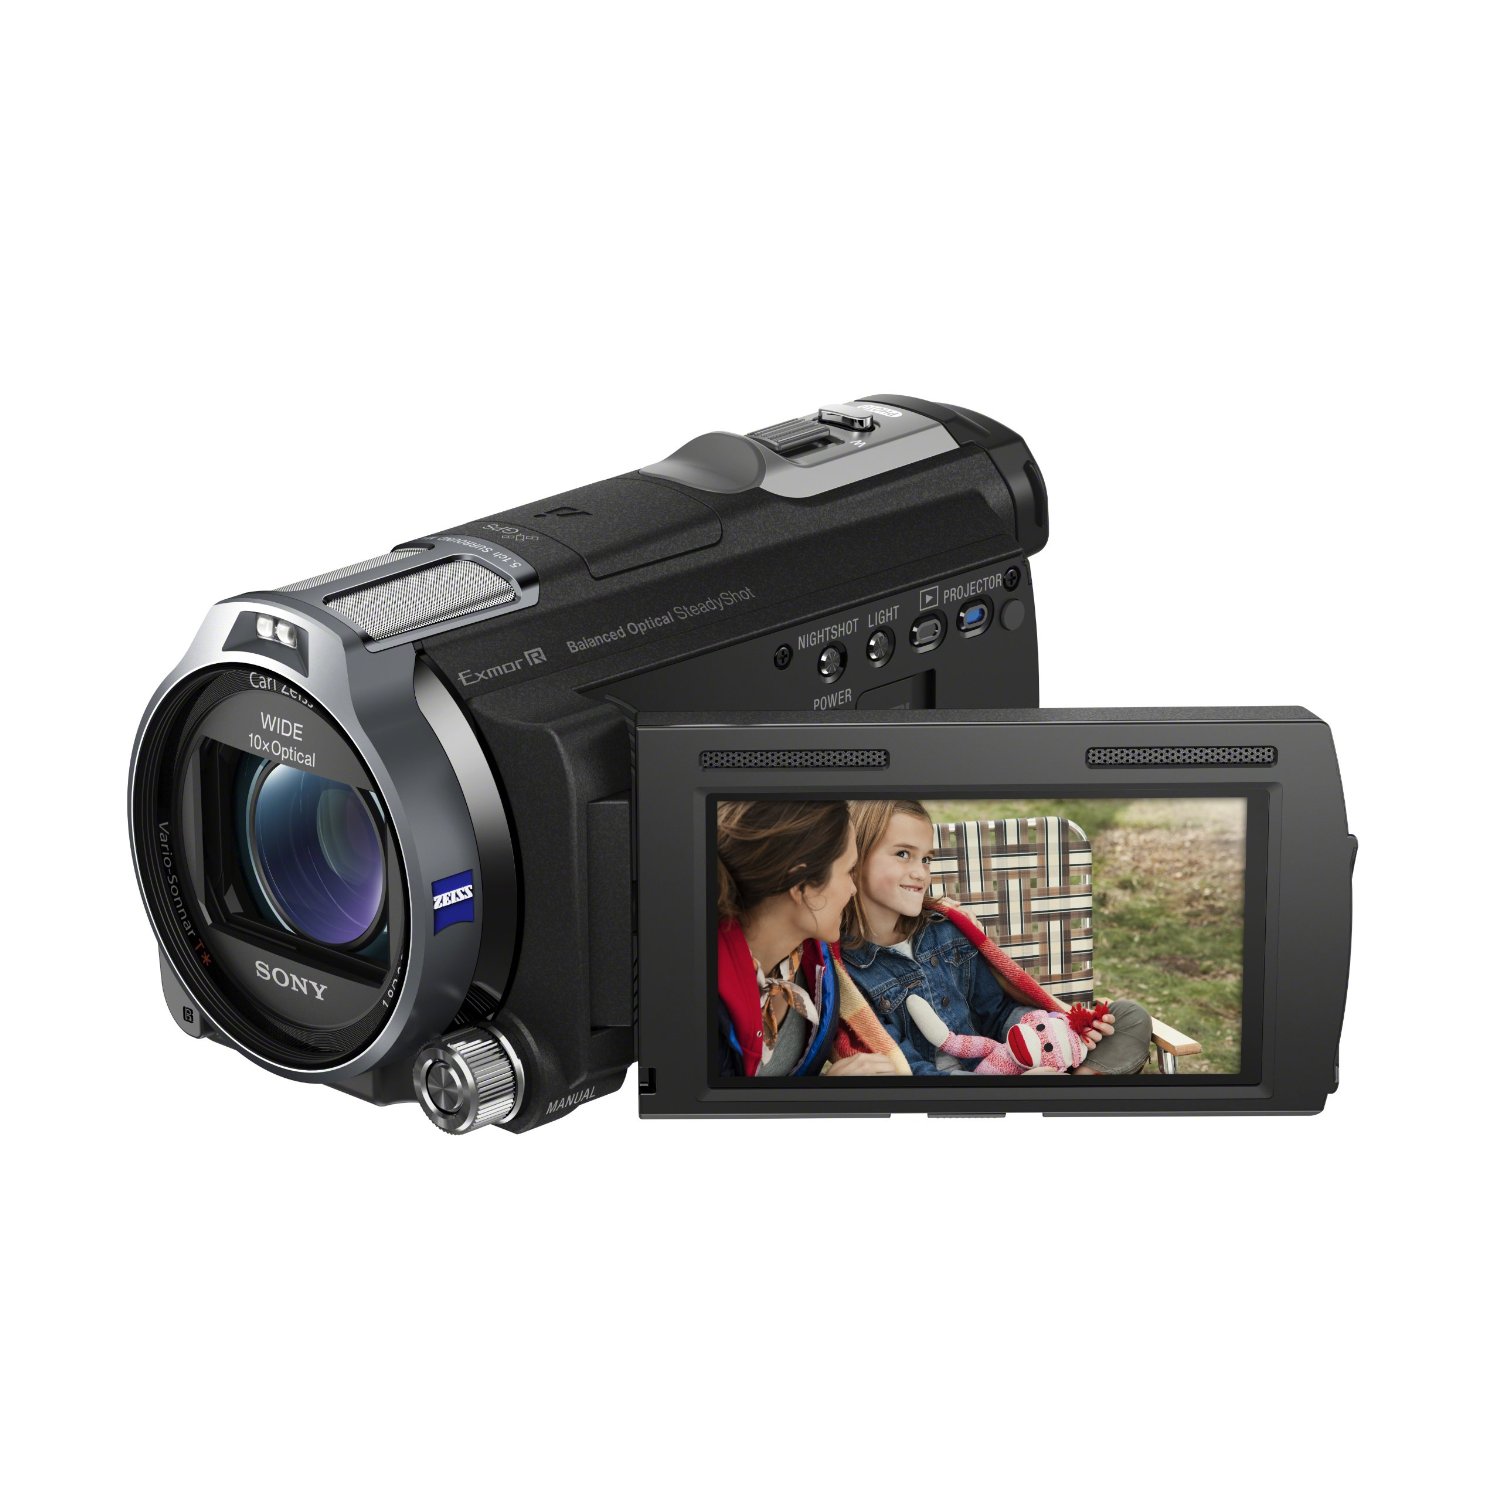 http://thetechjournal.com/wp-content/uploads/images/1201/1327336709-sony-hdrpj760v-241-mp-camcorder-high-definition-handycam-1.jpg